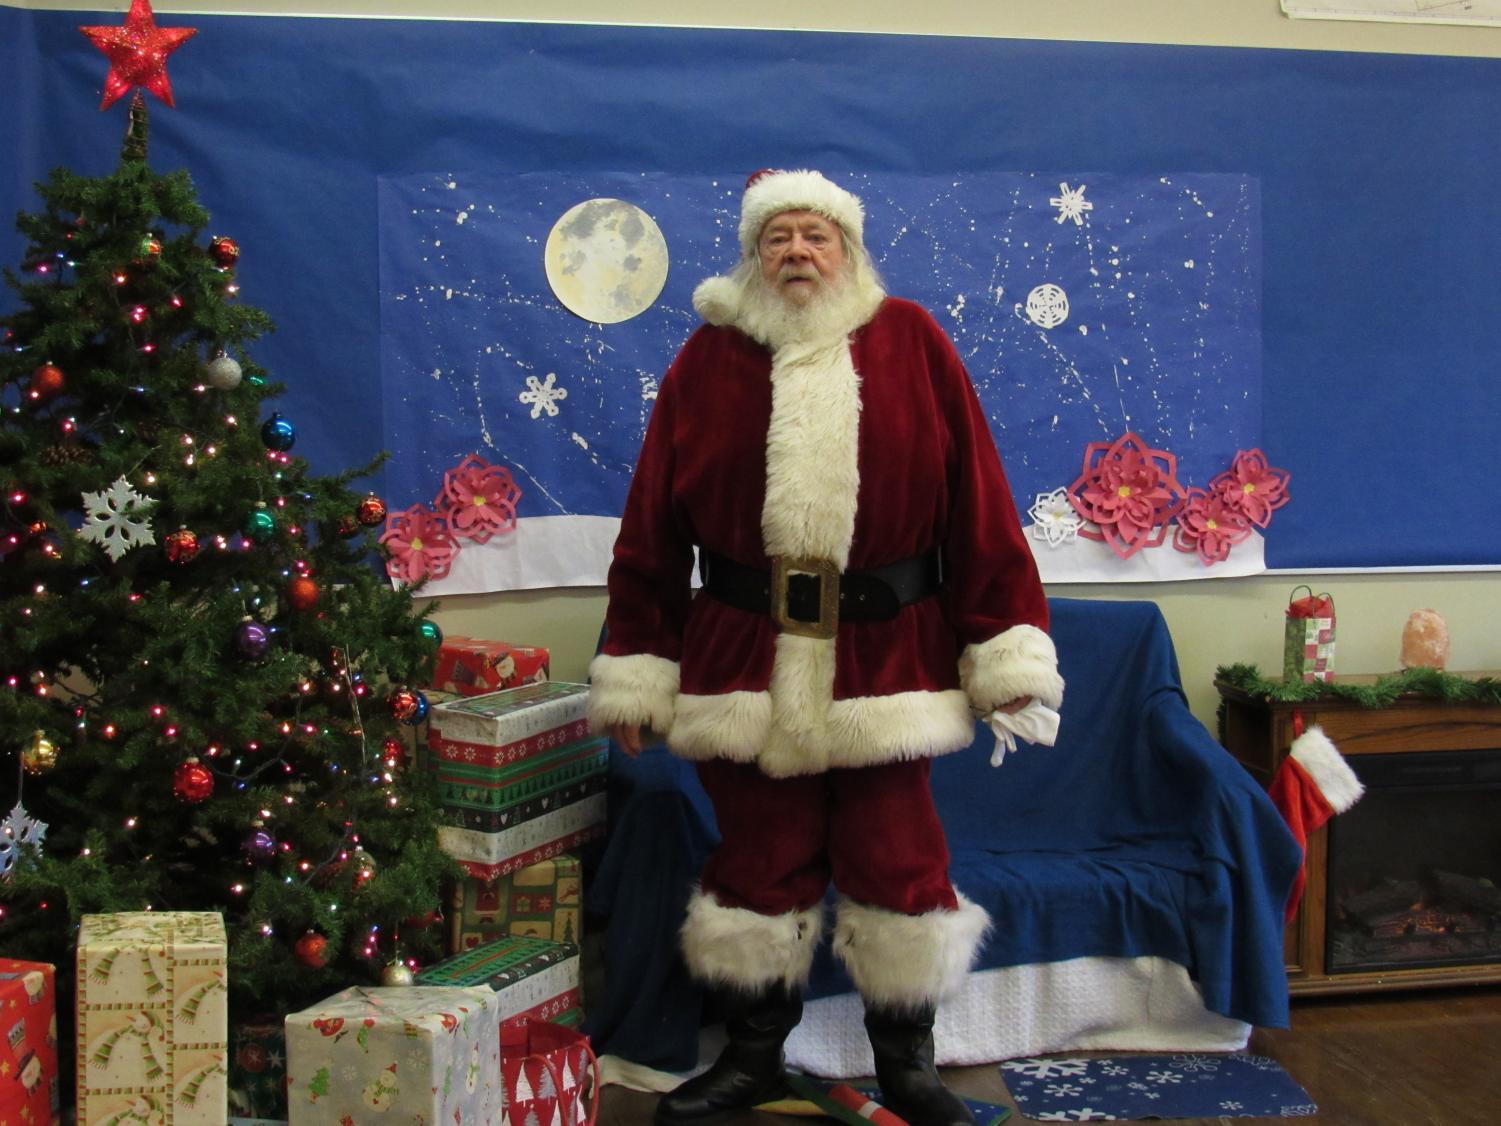 ACE+Wraps+Up+2022+With+Annual+Breakfast+With+Santa+Event